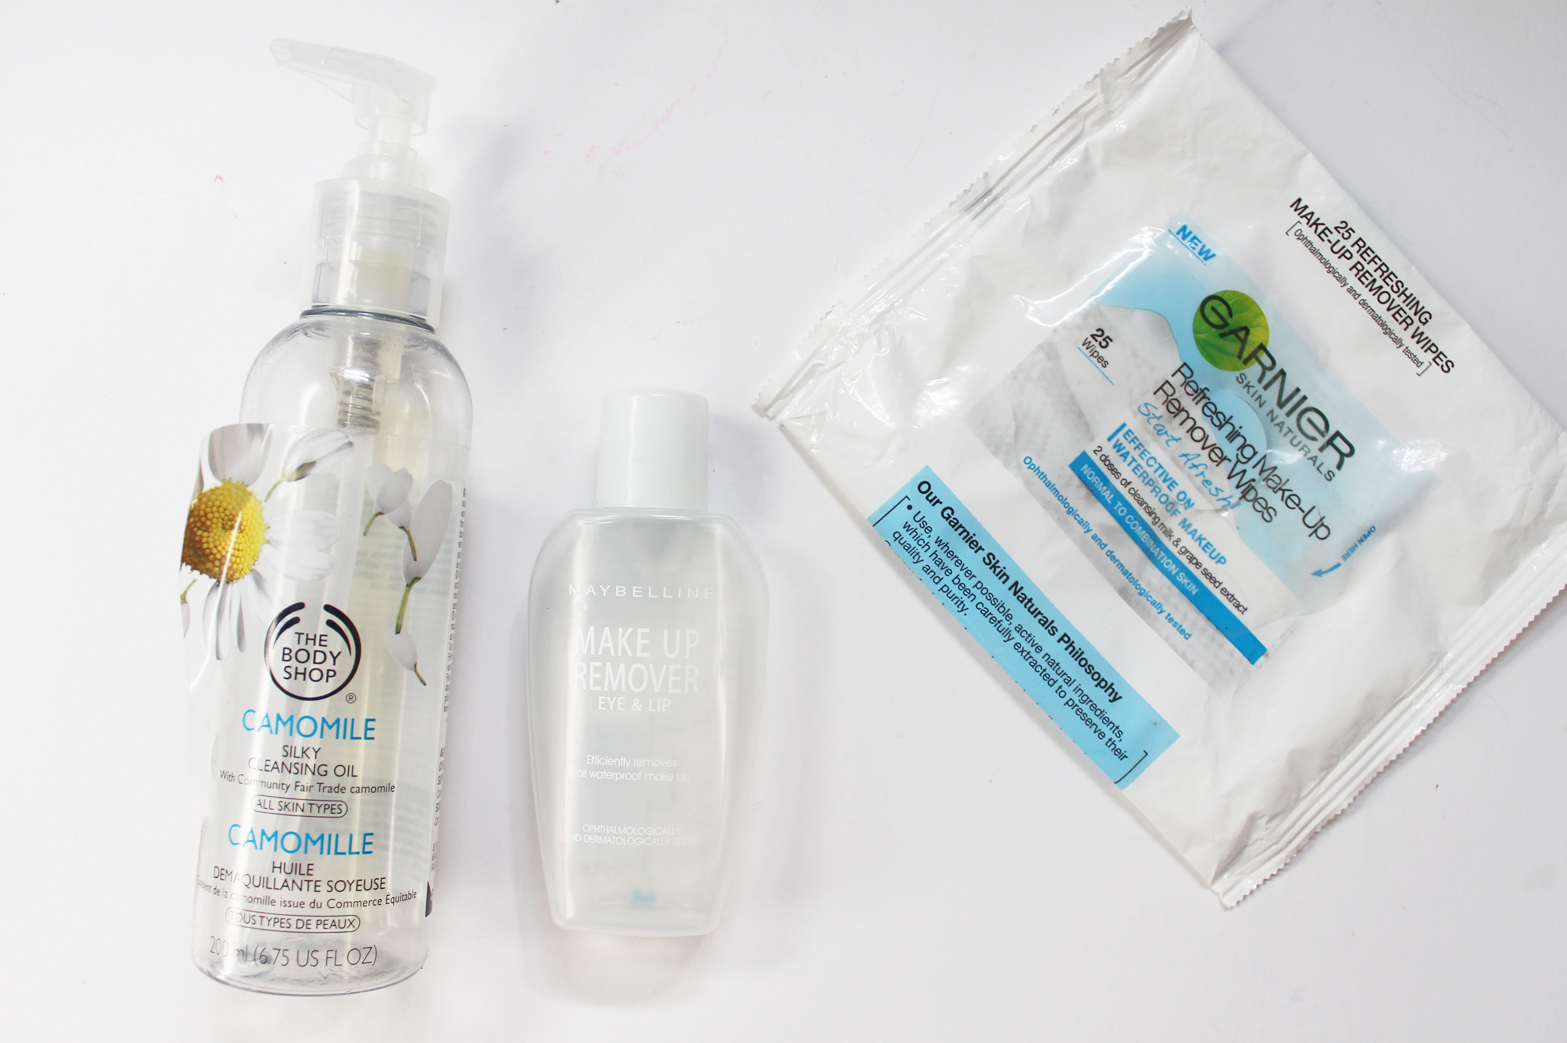 EMPTIES | March '16 - Product Reviews - The Body Shop, Clinique, Maybelline, Batiste, Garnier, Za, Goodness Products, Anastasia Beverly Hills - CassandraMyee